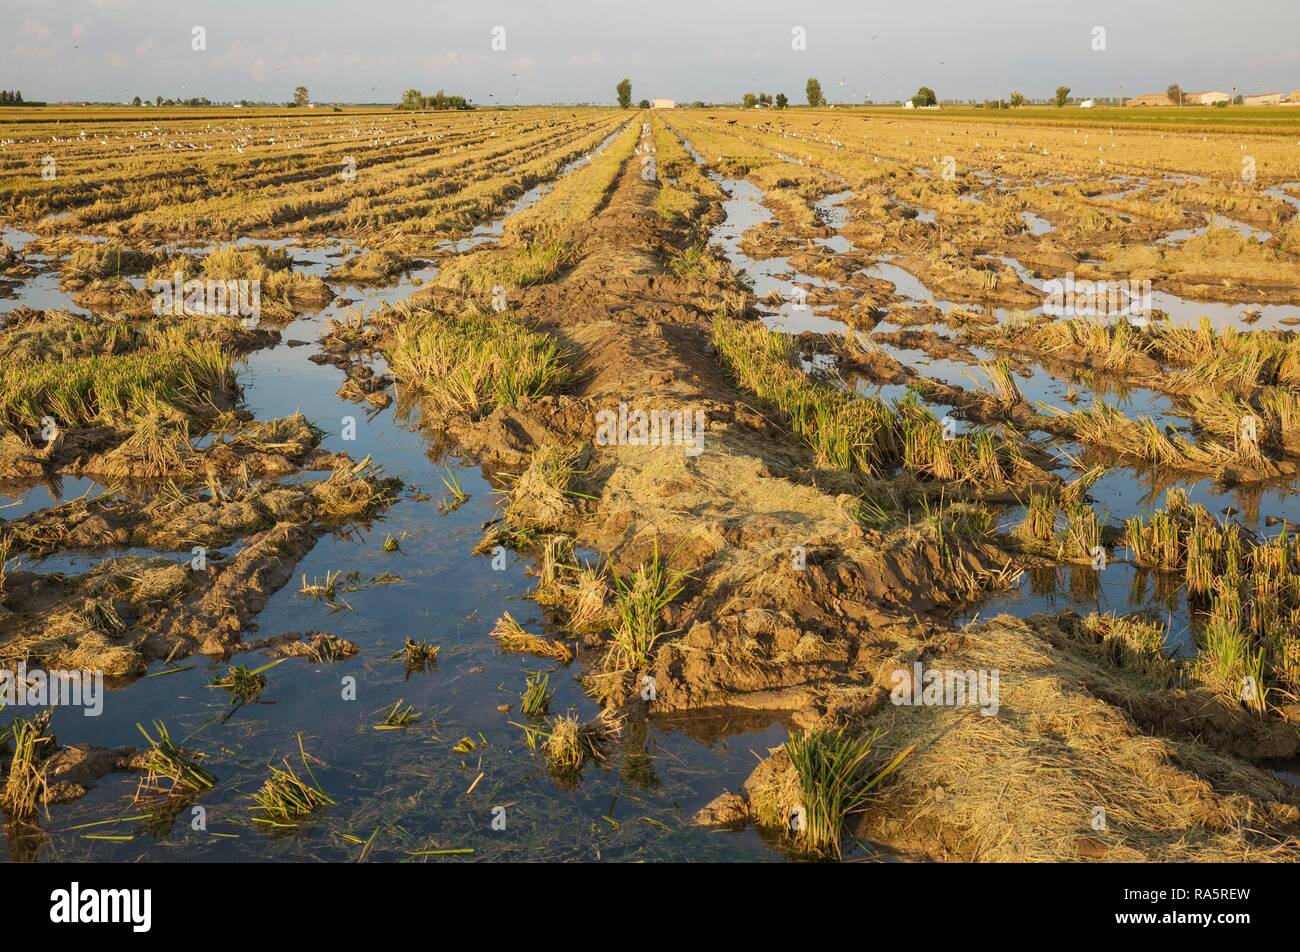 Desolated rice field (Oryza sativa) just after the rice harvest, environs of the Ebro Delta Nature Reserve, Tarragona province Stock Photo